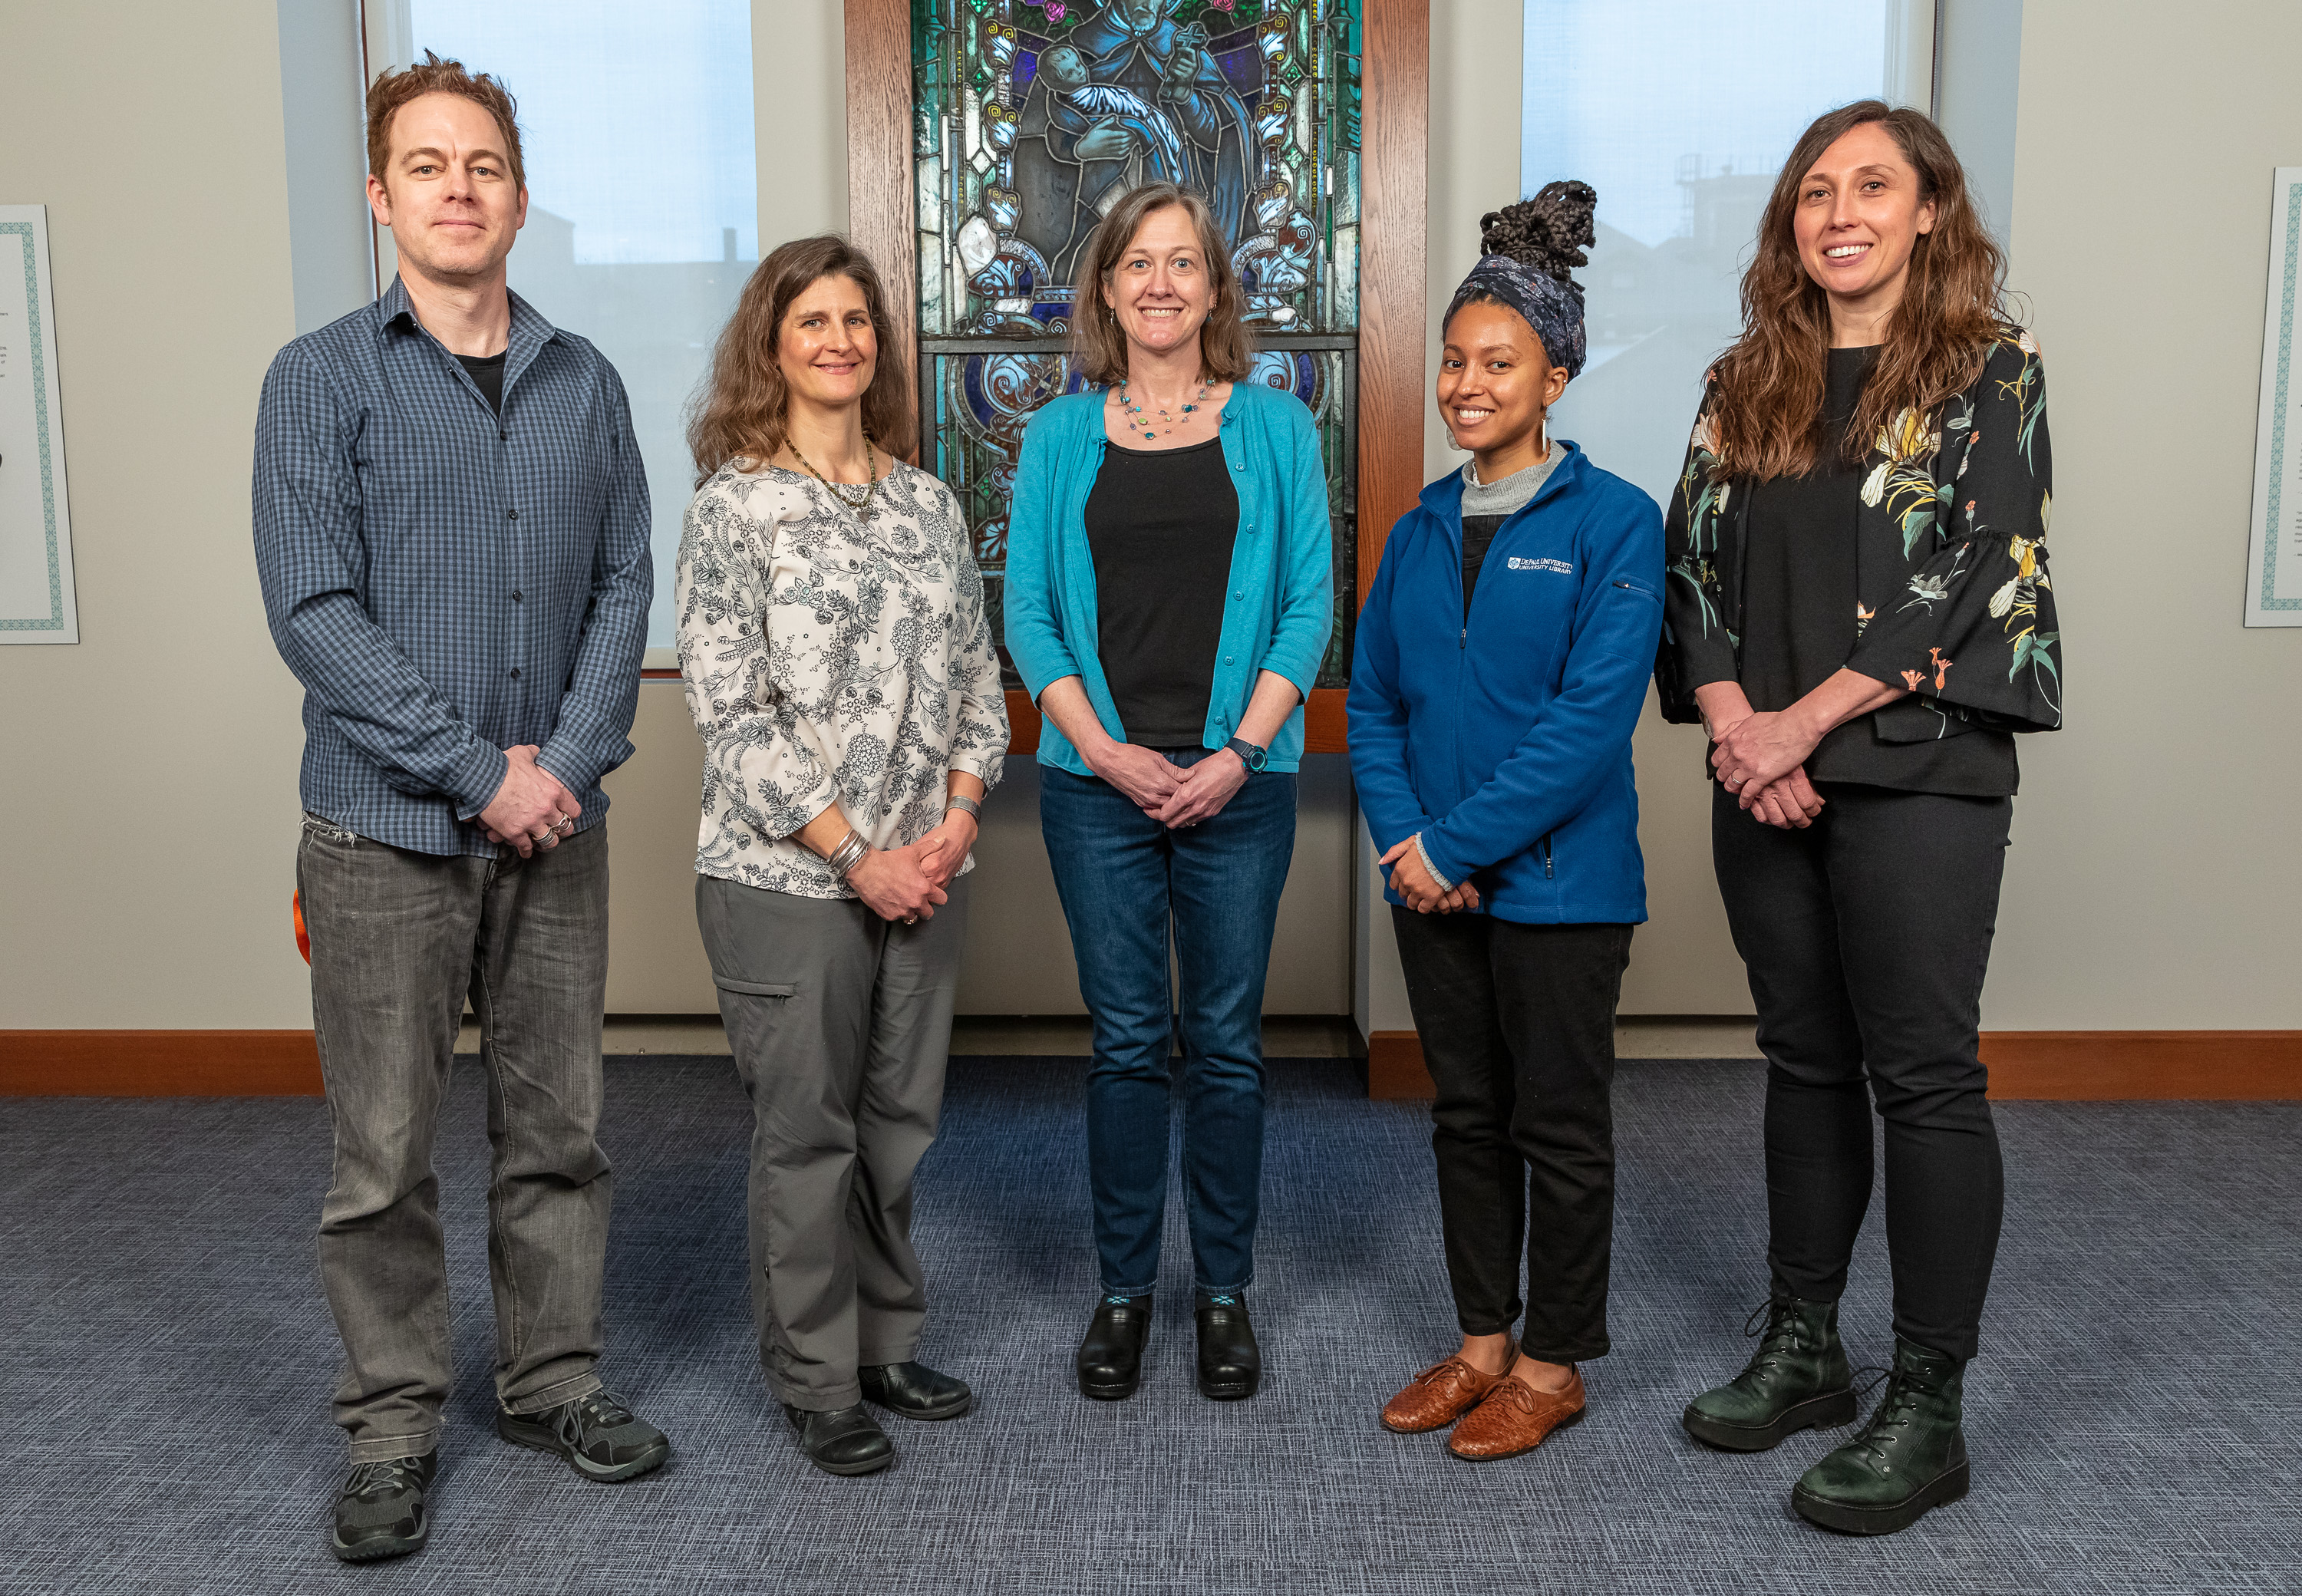 (Left to right) Derek Potts, Morgen MacIntosh Hodgetts, Jamie Nelson, Rebekah Otto and Brittan Nannenga serve on the special collecion and archives team in the DePaul University Library. These staff collect, preserve, and share rare books; DePaul University, Vincentian, and community archives; and maps with the DePaul community. This team also authors Newsline's Into the Archives column. Not pictured: Nora Gabor. (DePaul University/Randall Spriggs)